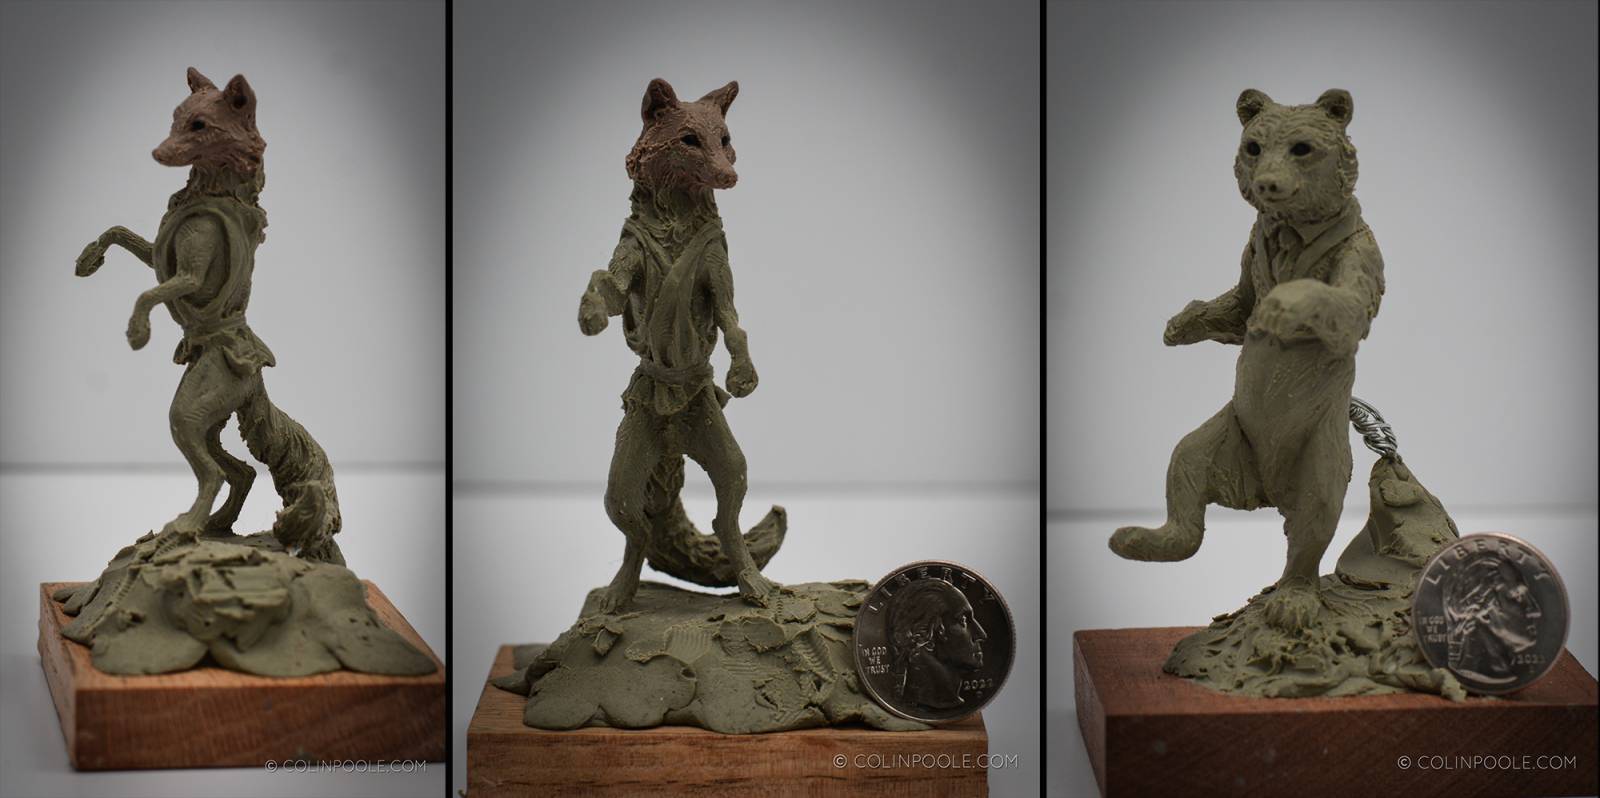 Monster Clay - The Compleat Sculptor